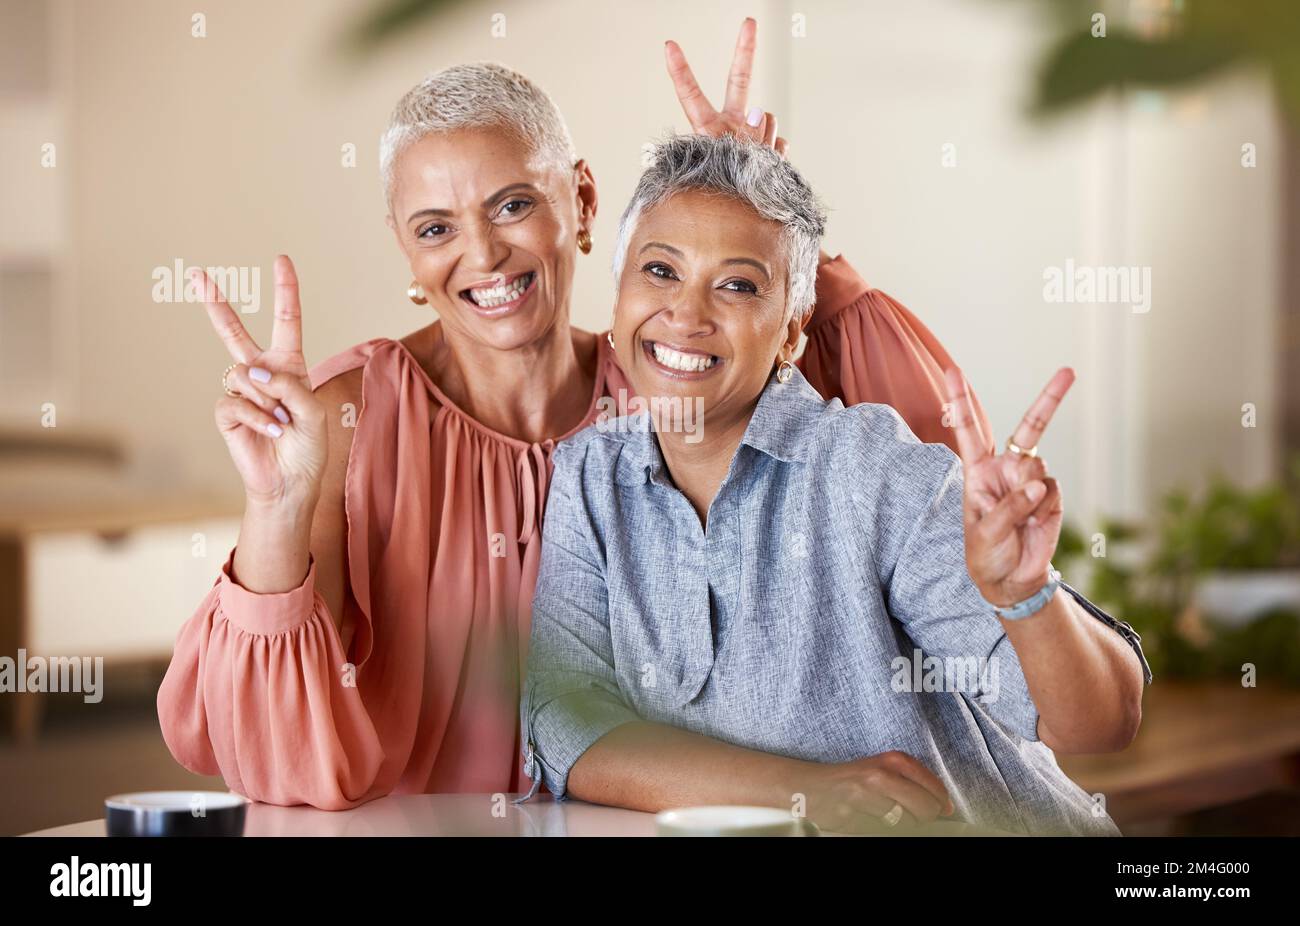 Senior women, bonding or peace sign in house or home living room for social media, profile picture or cool memory capture. Portrait, happy smile or Stock Photo